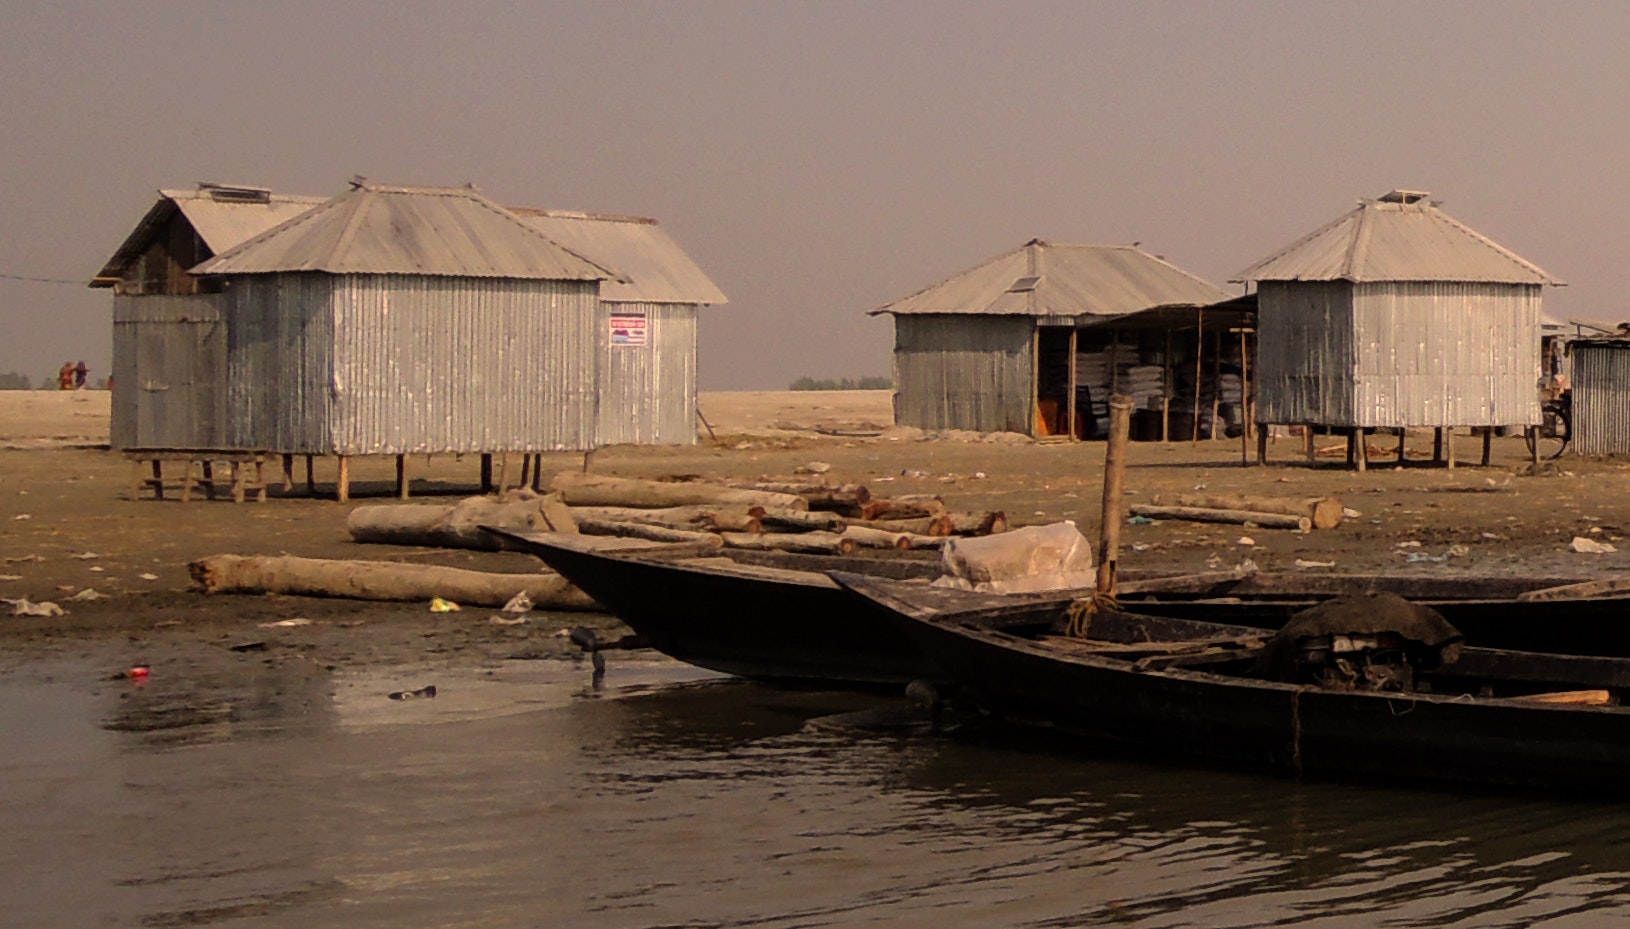 Shelters on the Brahmaputra River in Bangladesh.